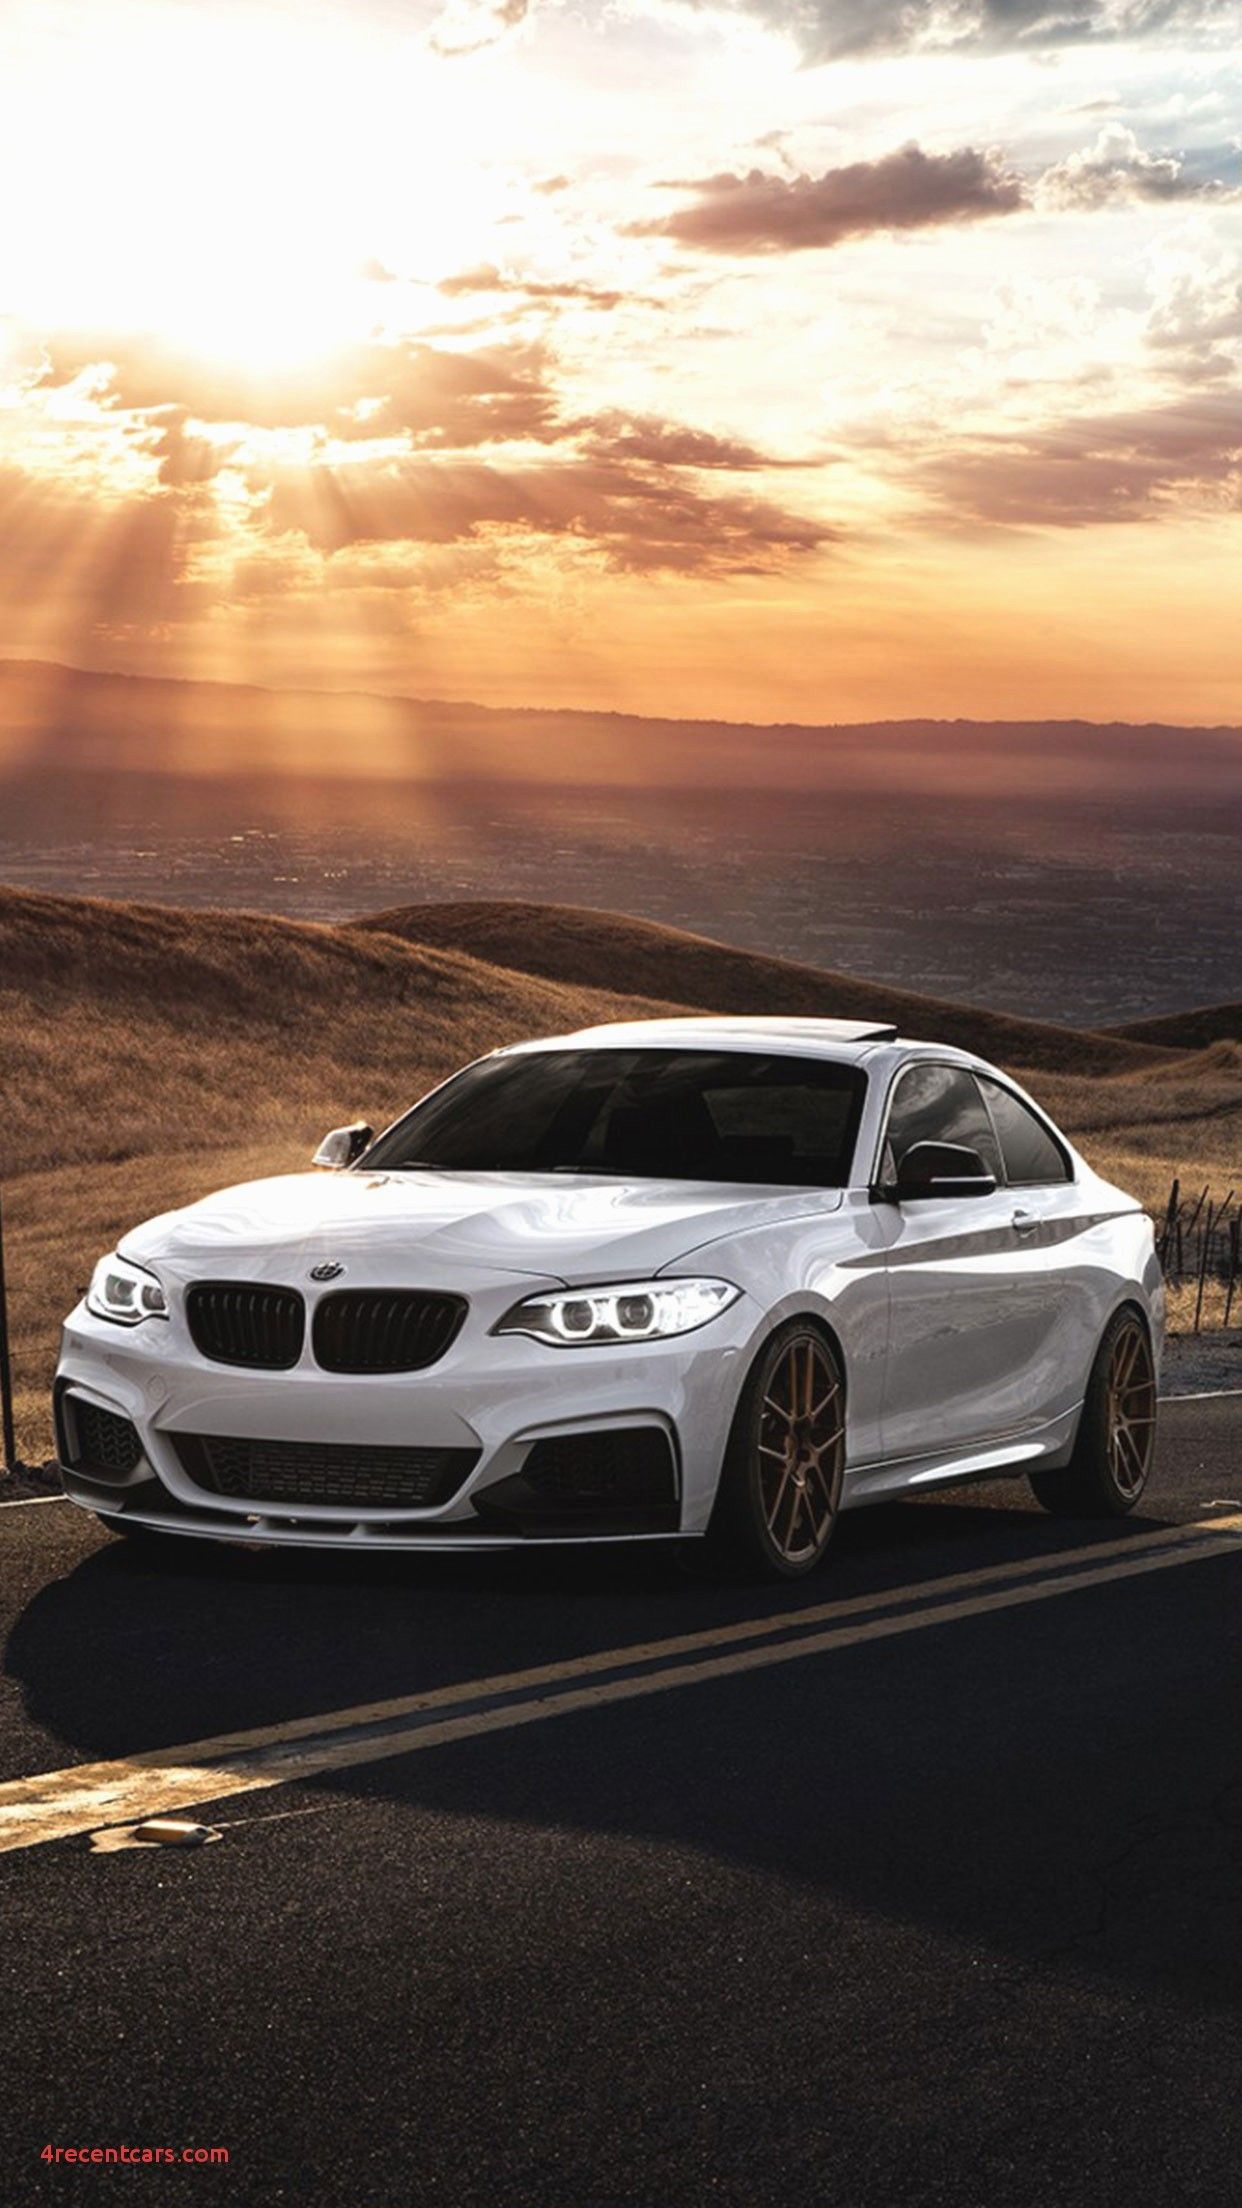 Iphone 5s Car Wallpapers New Iphone 5 Car Wallpapers - Bmw M5 Wallpaper 4k For Phone - HD Wallpaper 